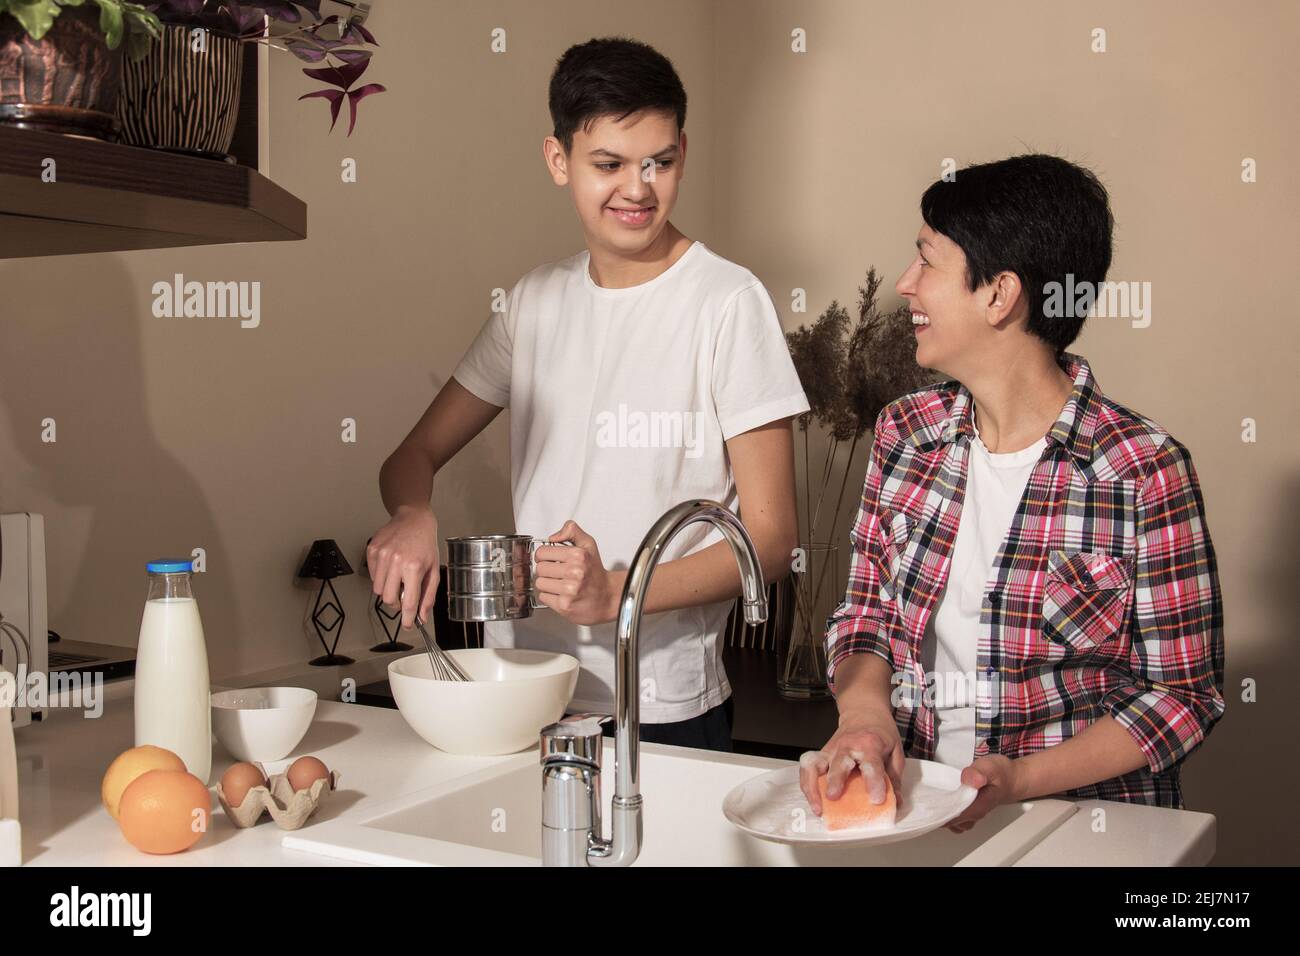 Happy smiling mother and son on kitchen. Teenage boy helping to cook food, mom washing the dishes. Relationship between parents and children Stock Photo